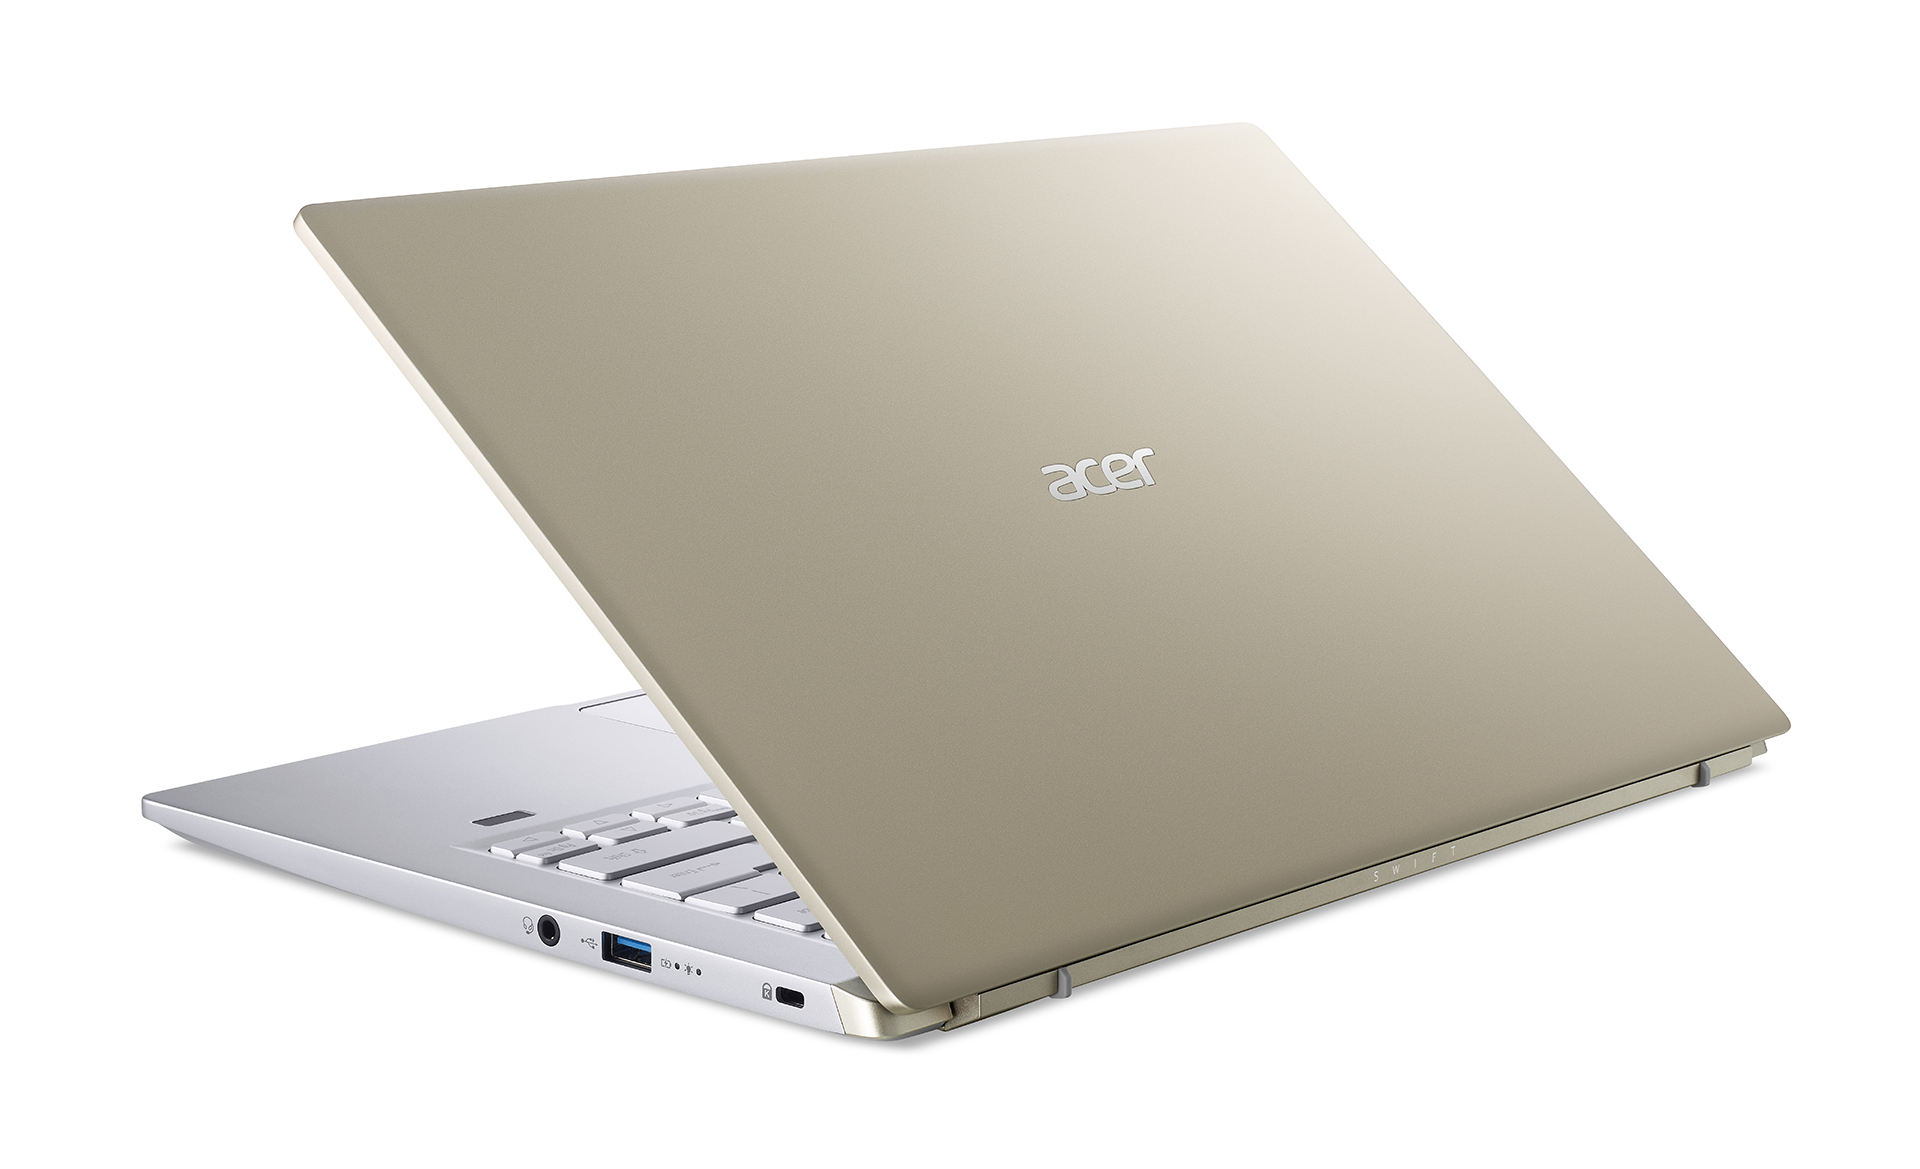 acer-launches-swift-x-premium-thin-and-light-laptop-featuring-amd-5000-series-processor